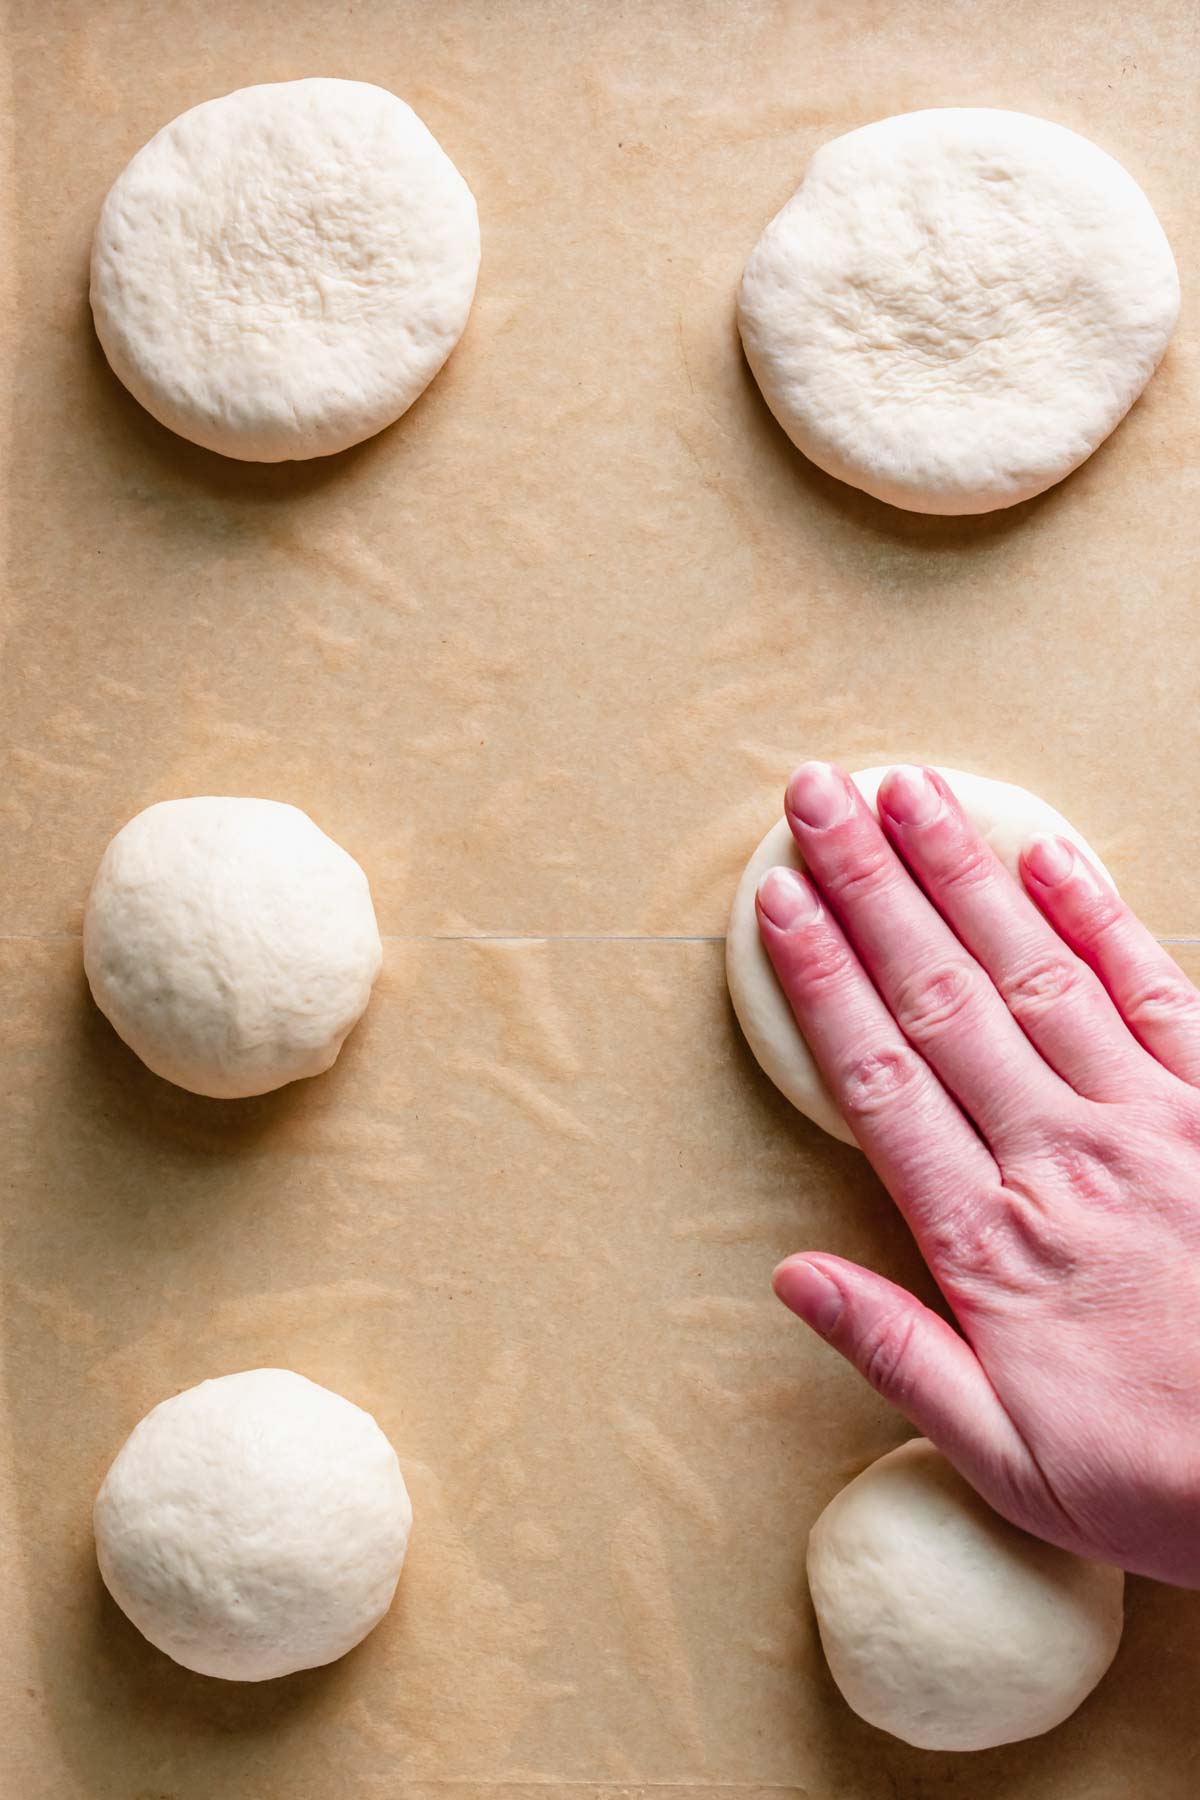 A hand pushes down the dough into discs.